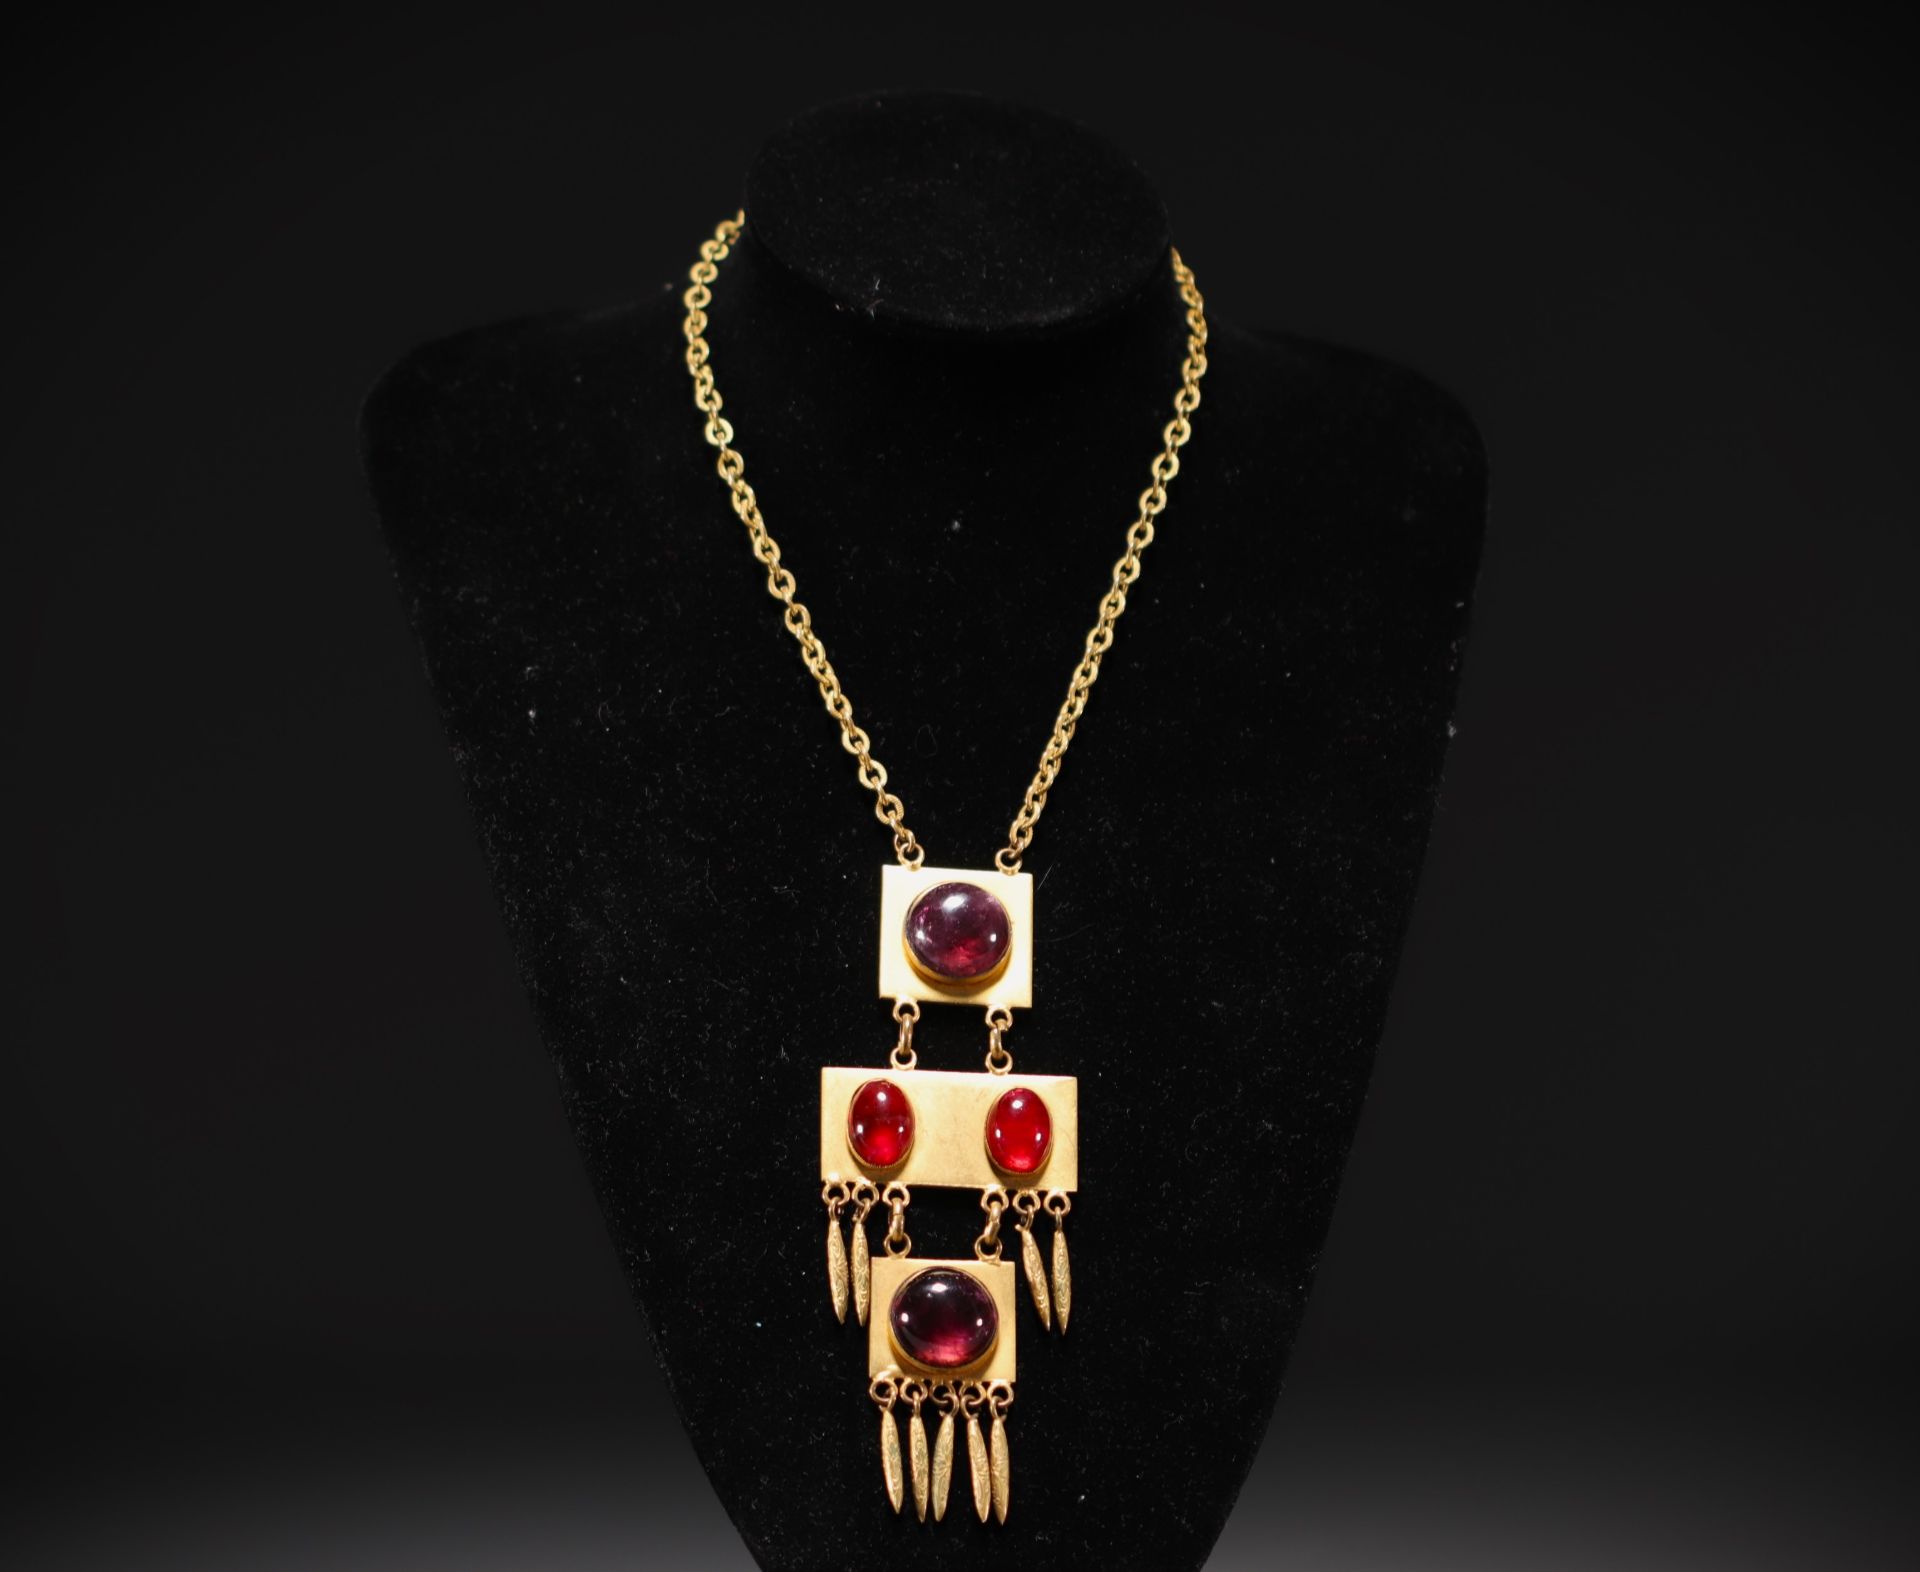 Roger SCEMAMA (1898-1989) attr. to for Yves Saint Laurent, necklace in gilt metal and glass cabochon - Bild 2 aus 2